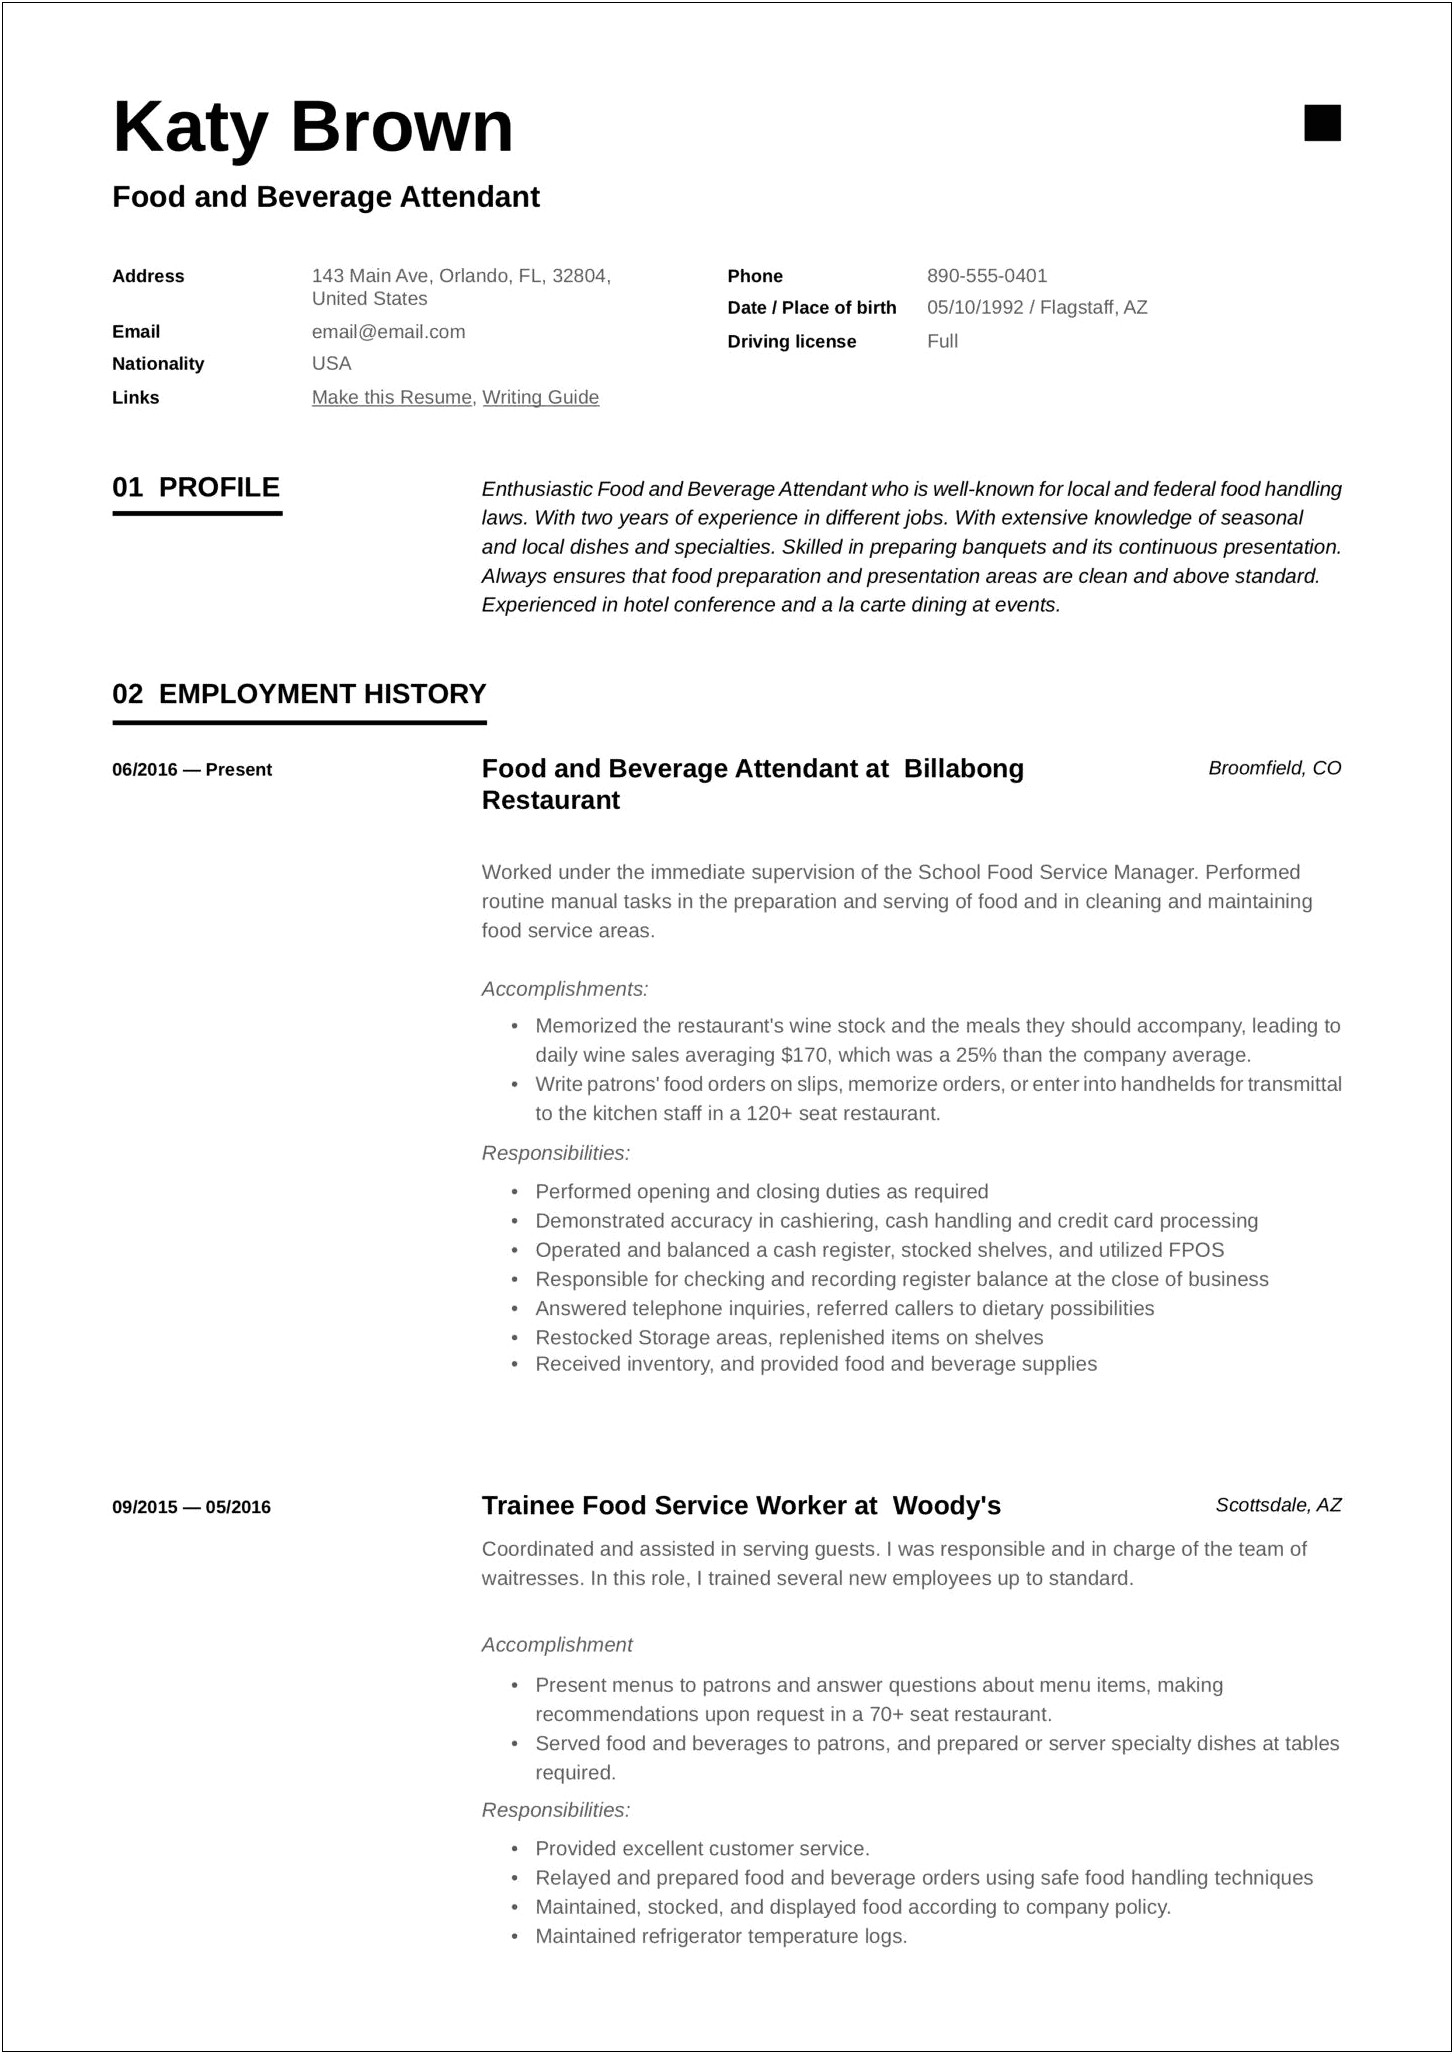 Resume Objective Examples For Food Service